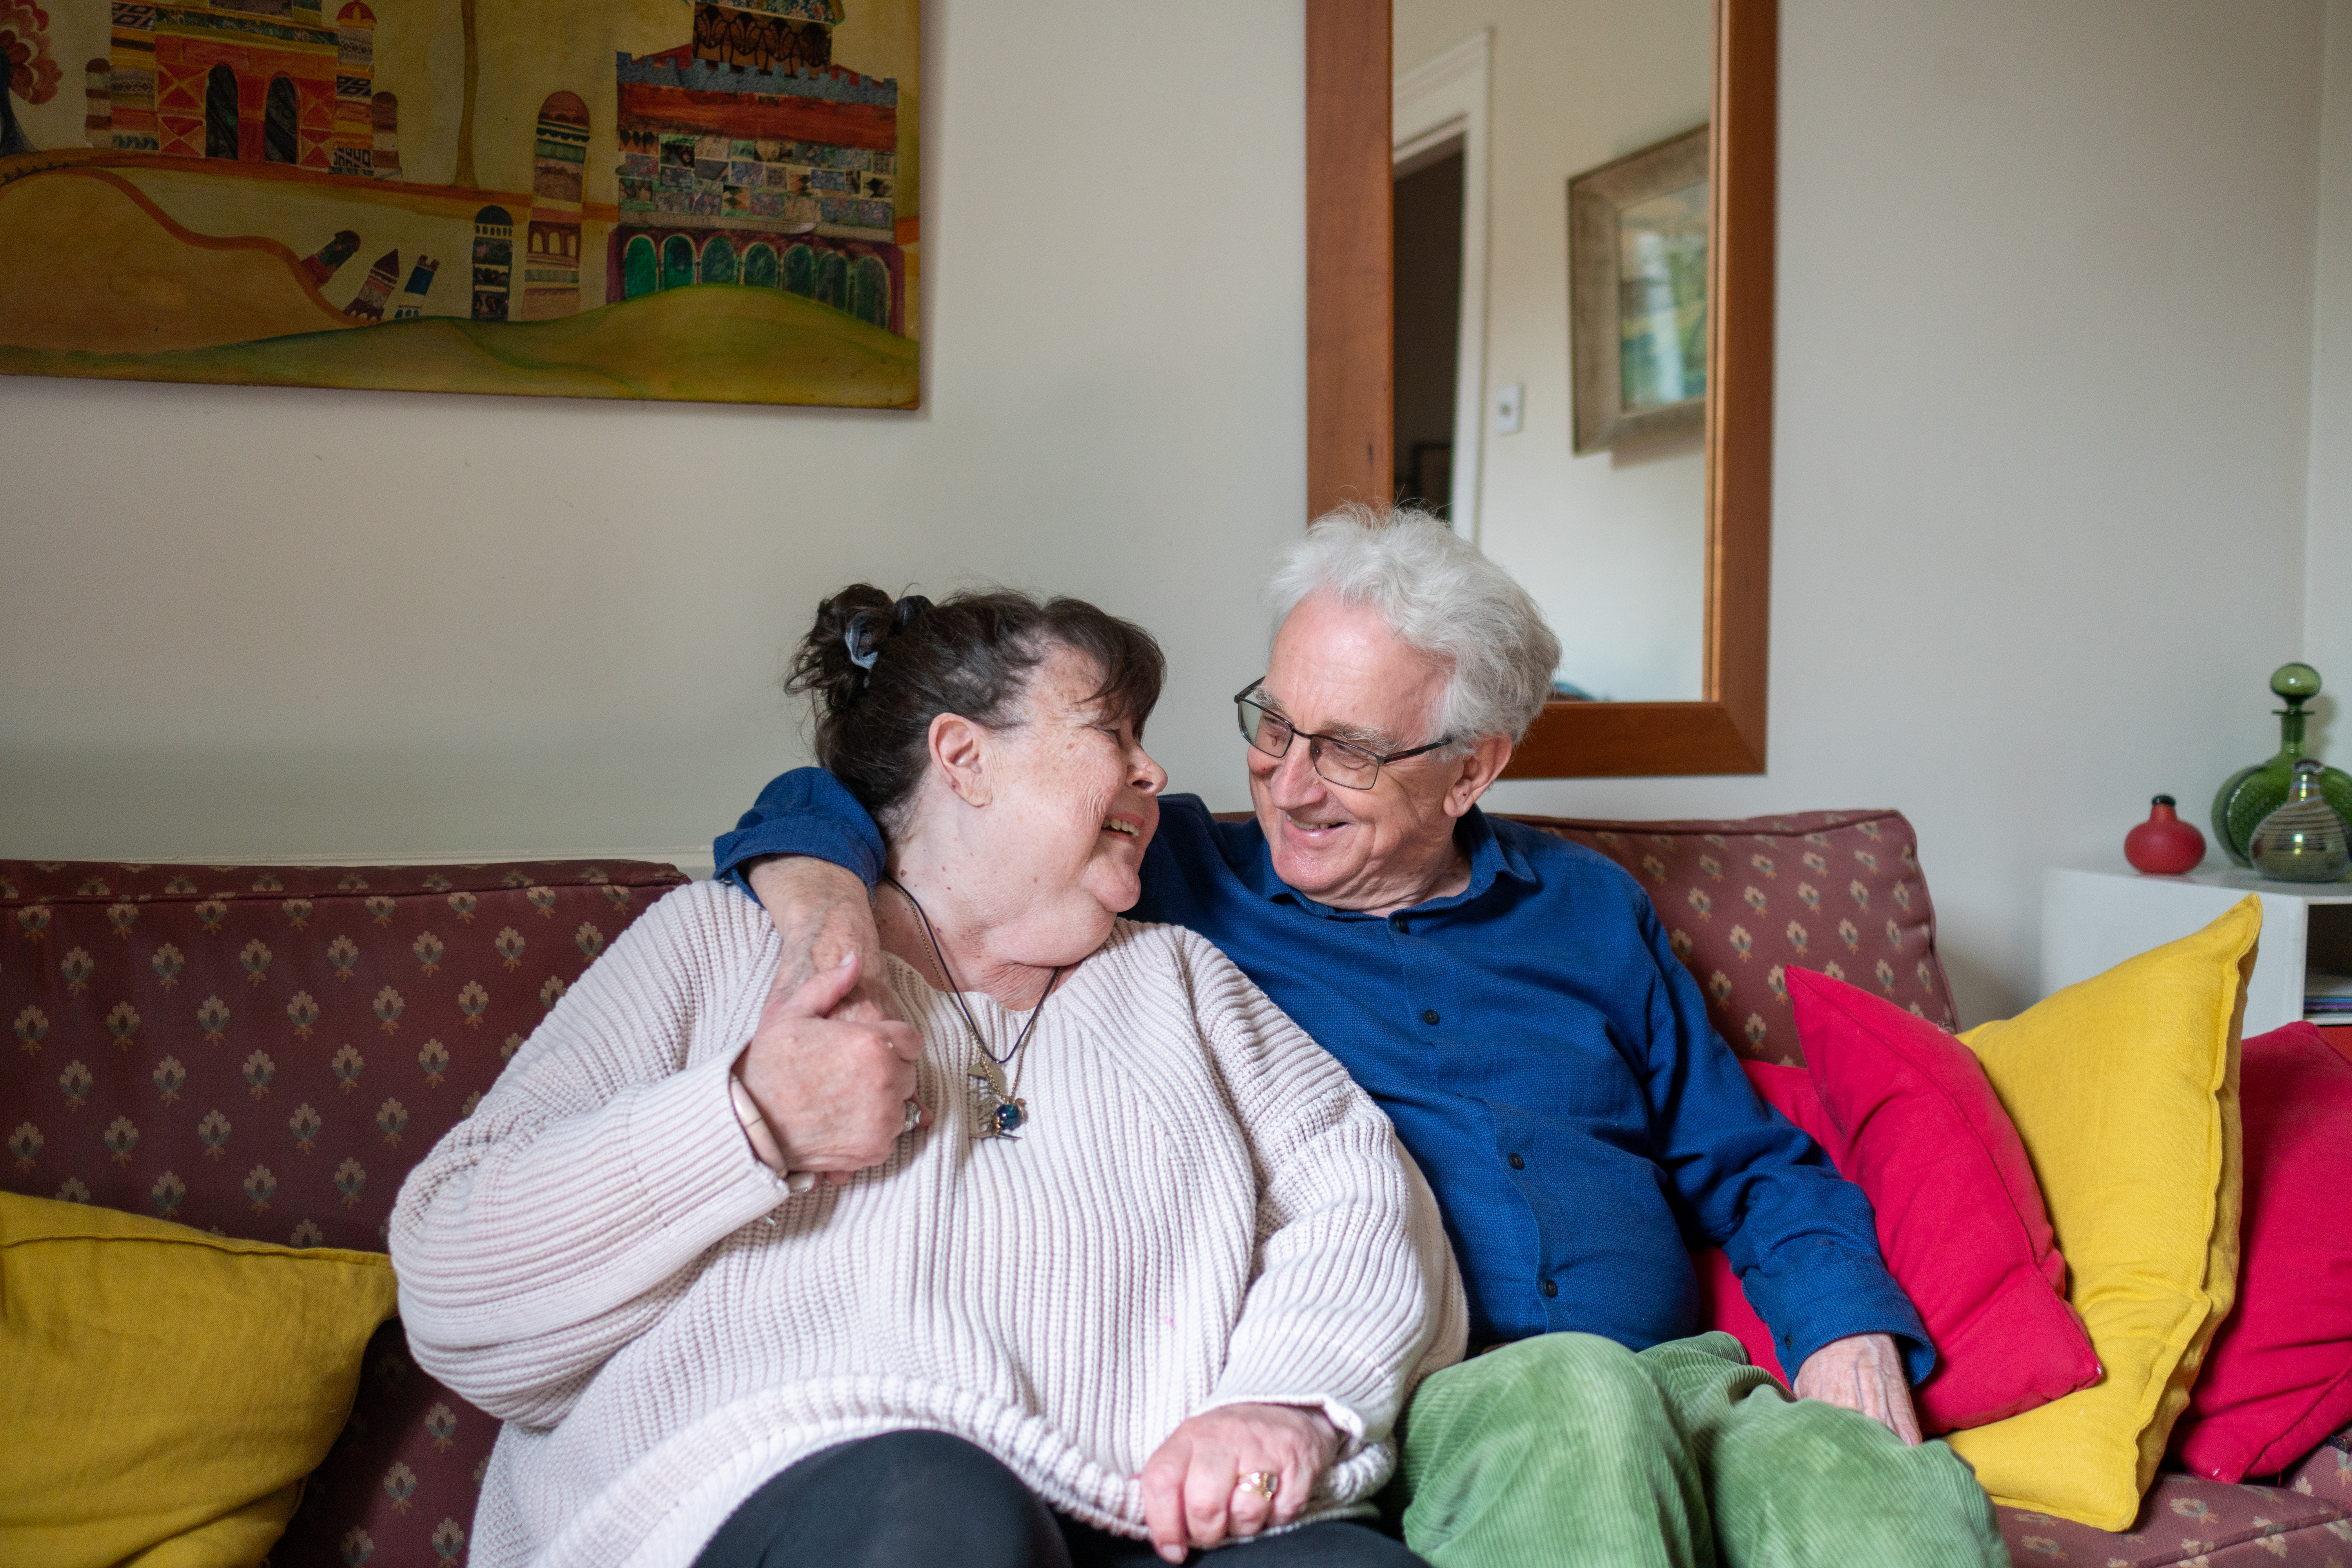 An older couple sat cuddling and smiling to one another on a sofa